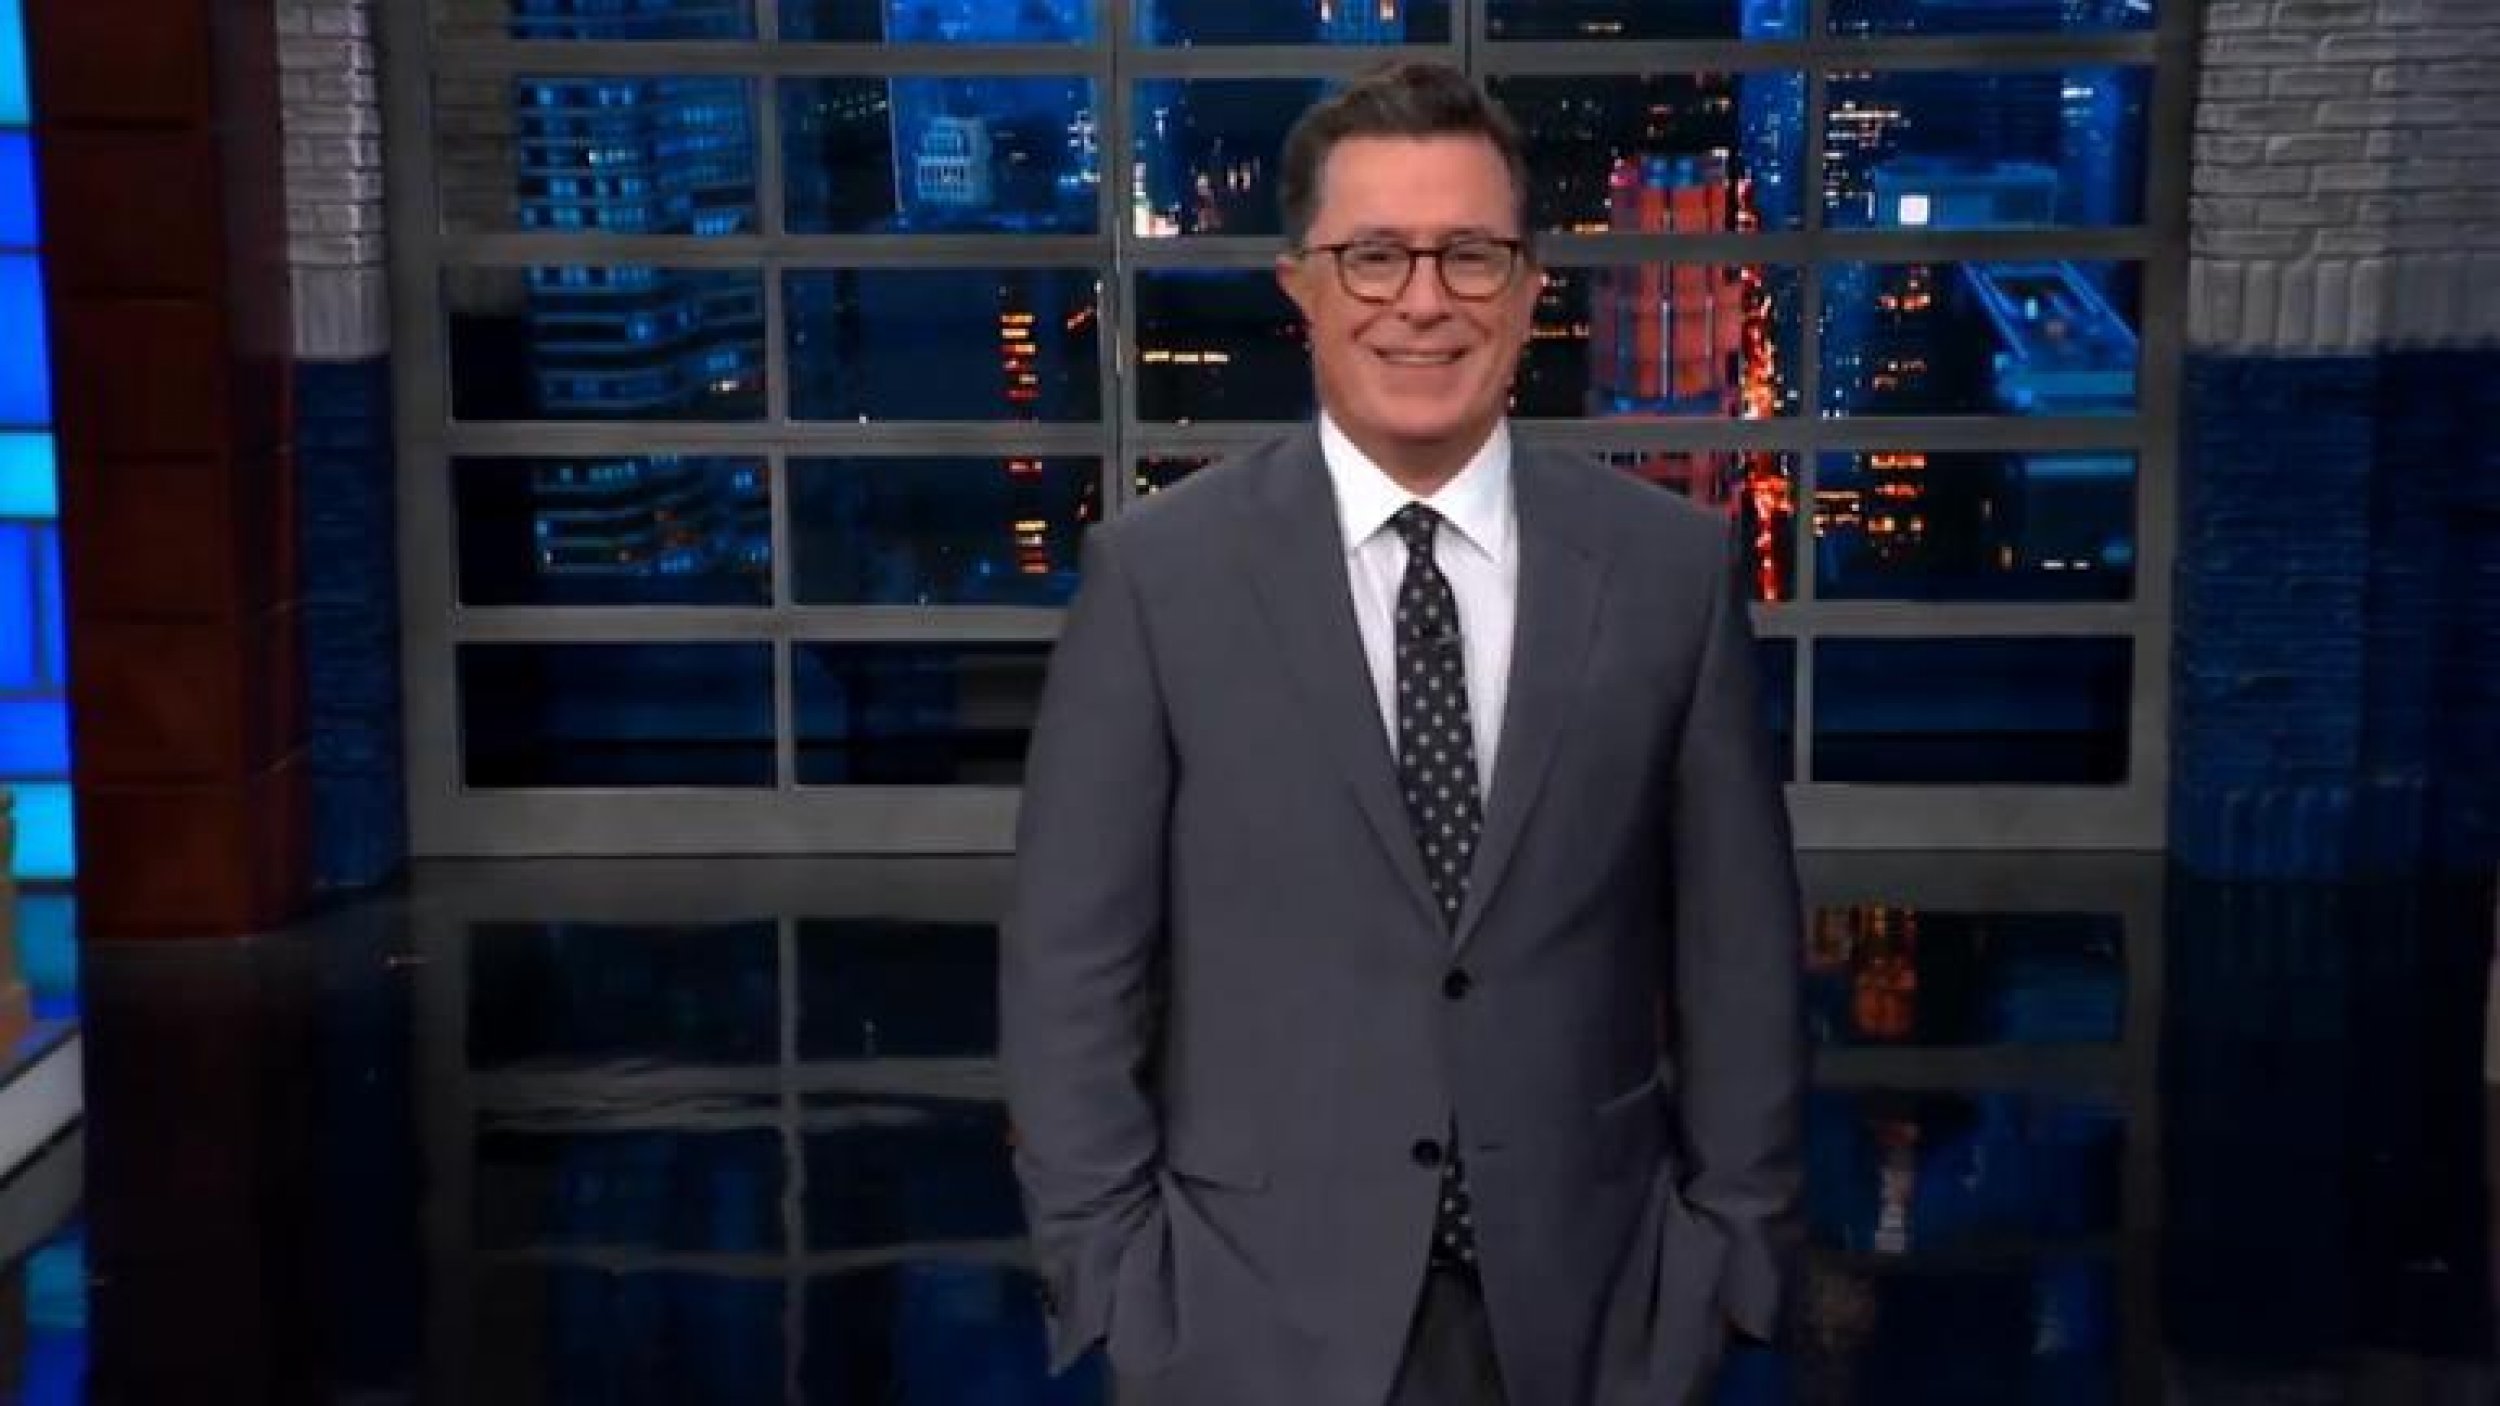 Stephen Colbert Finally We Have Proof That the Guy Who Refused to Rent to Black Tenants Is Racist